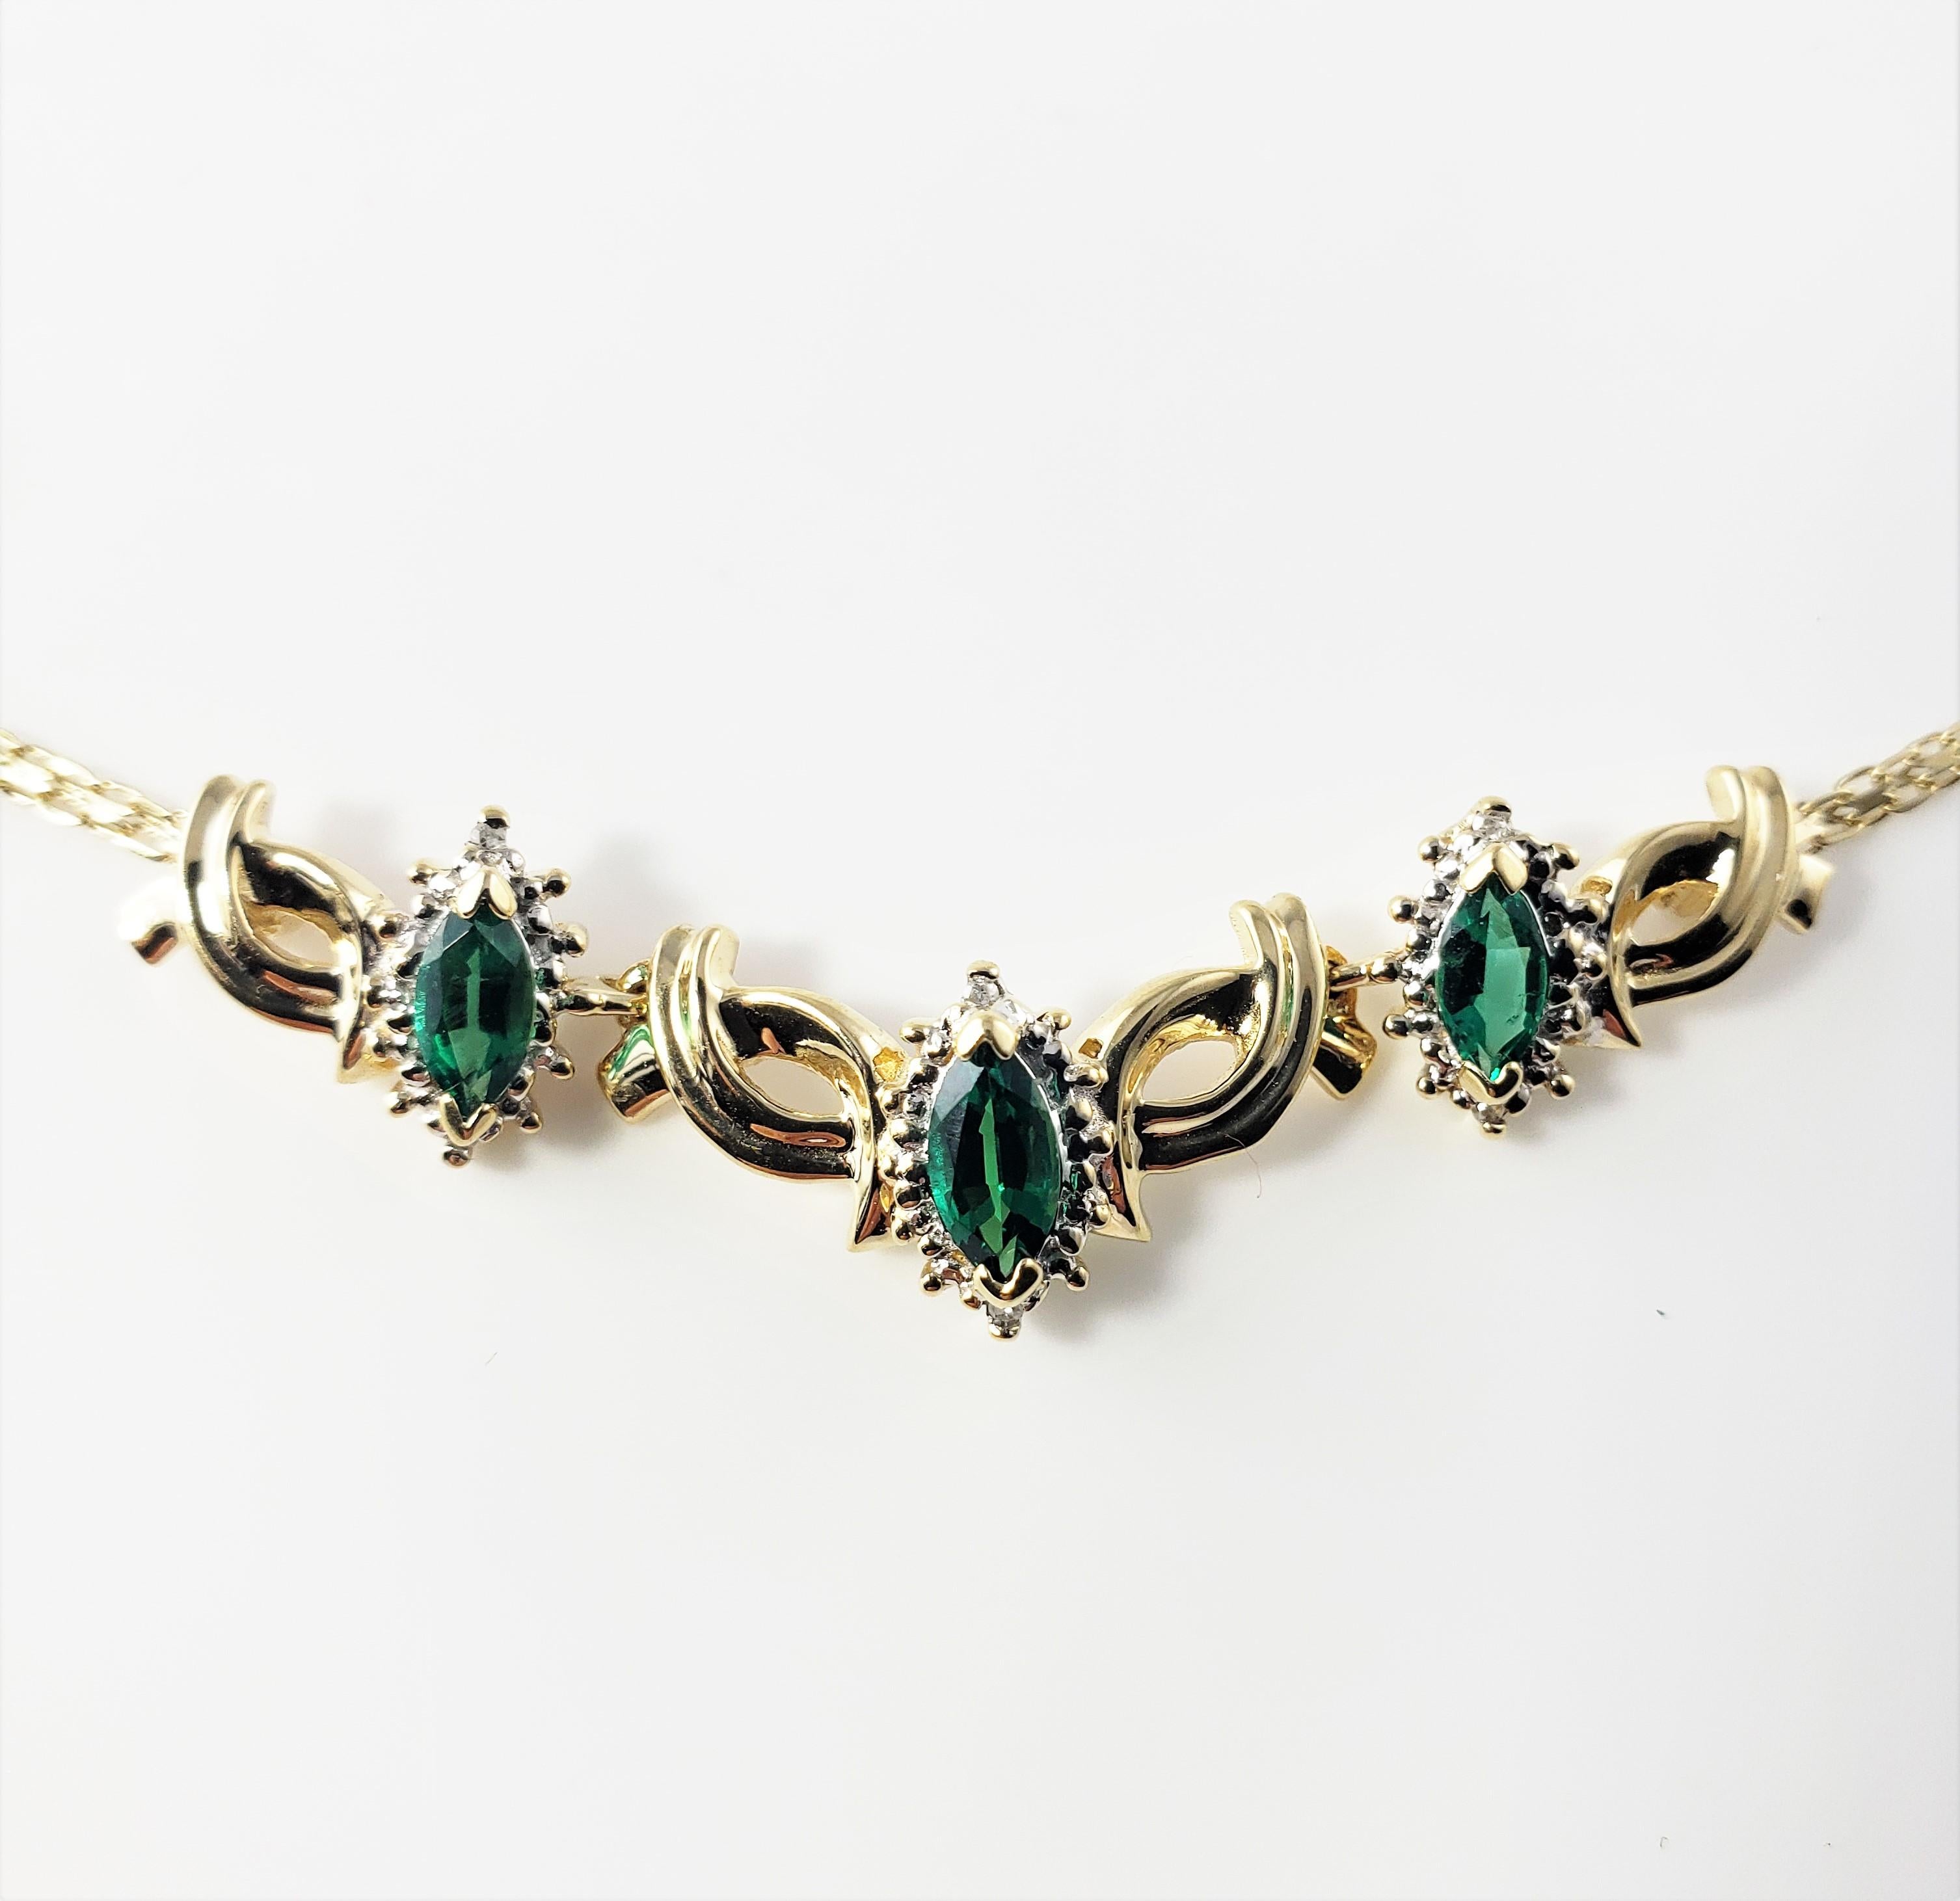 14 Karat Yellow Gold Simulated Emerald and Diamond Necklace-

This lovely necklace features three marquis simulated emeralds (6 mm x 3 mm each) and six round singe cut diamonds set in beautifully detailed 14K yellow gold.  Spring ring